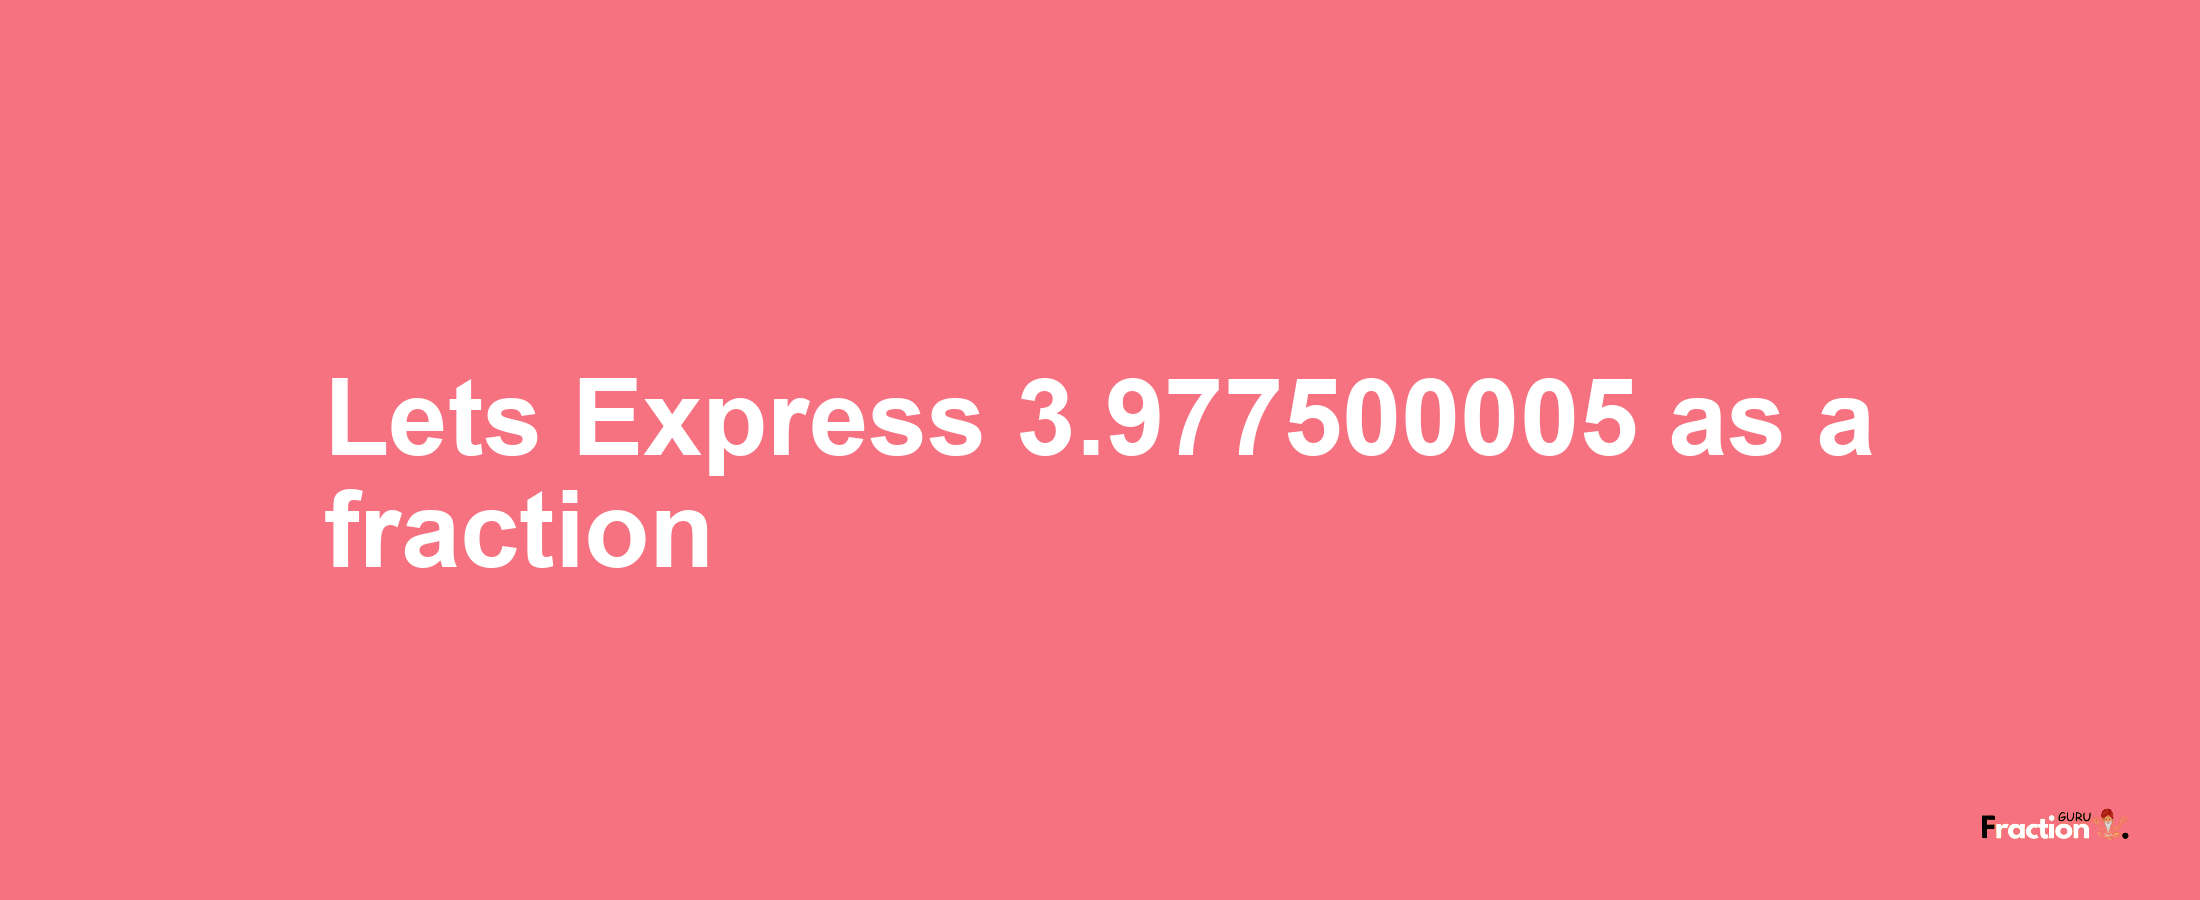 Lets Express 3.977500005 as afraction